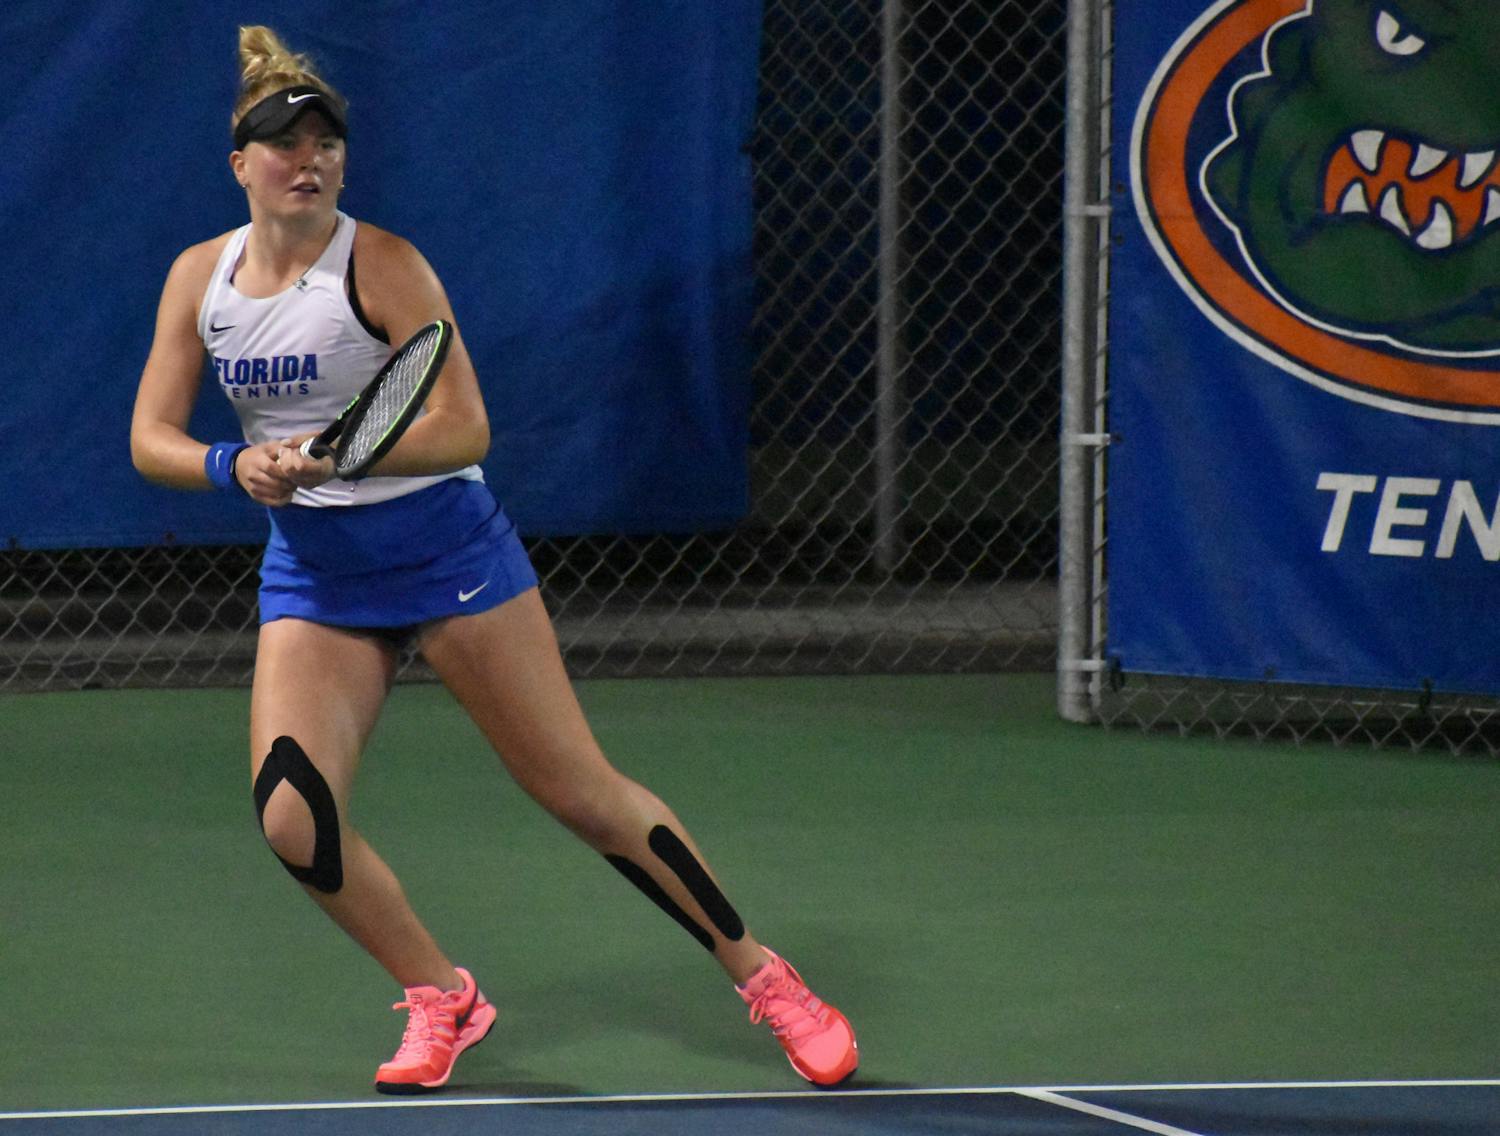 Florida&#x27;s Sarah Dahlstrom during a match against Central Florida on Feb. 9, 2021. The Gators women&#x27;s team shut down Ole Miss, 7-0 Friday night.